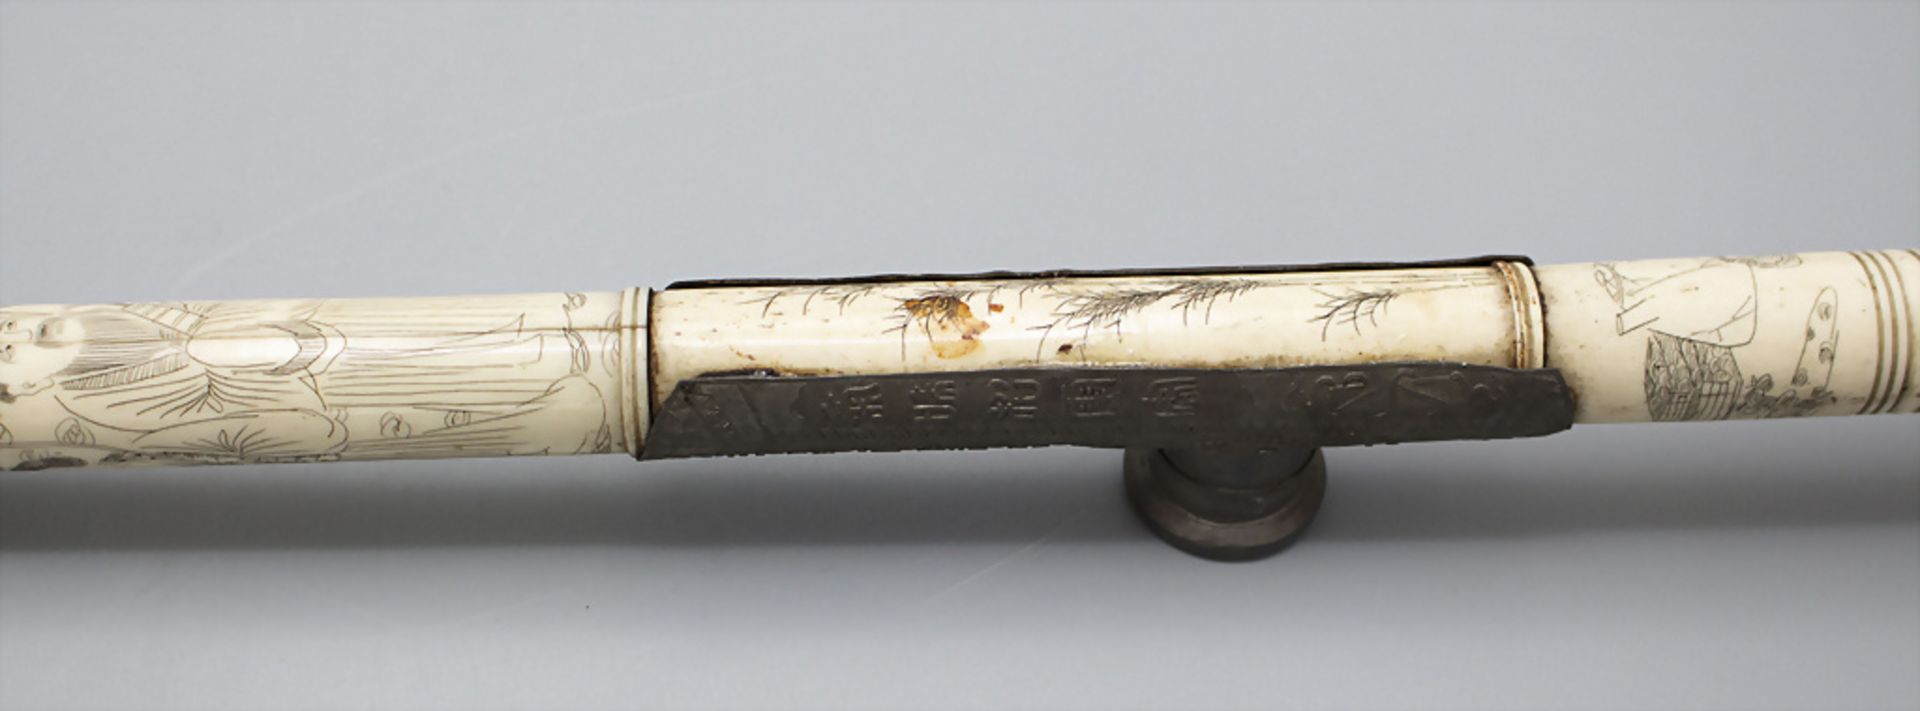 Opiumpfeife / An opium pipe, China, wohl 19. Jh. - Image 4 of 5